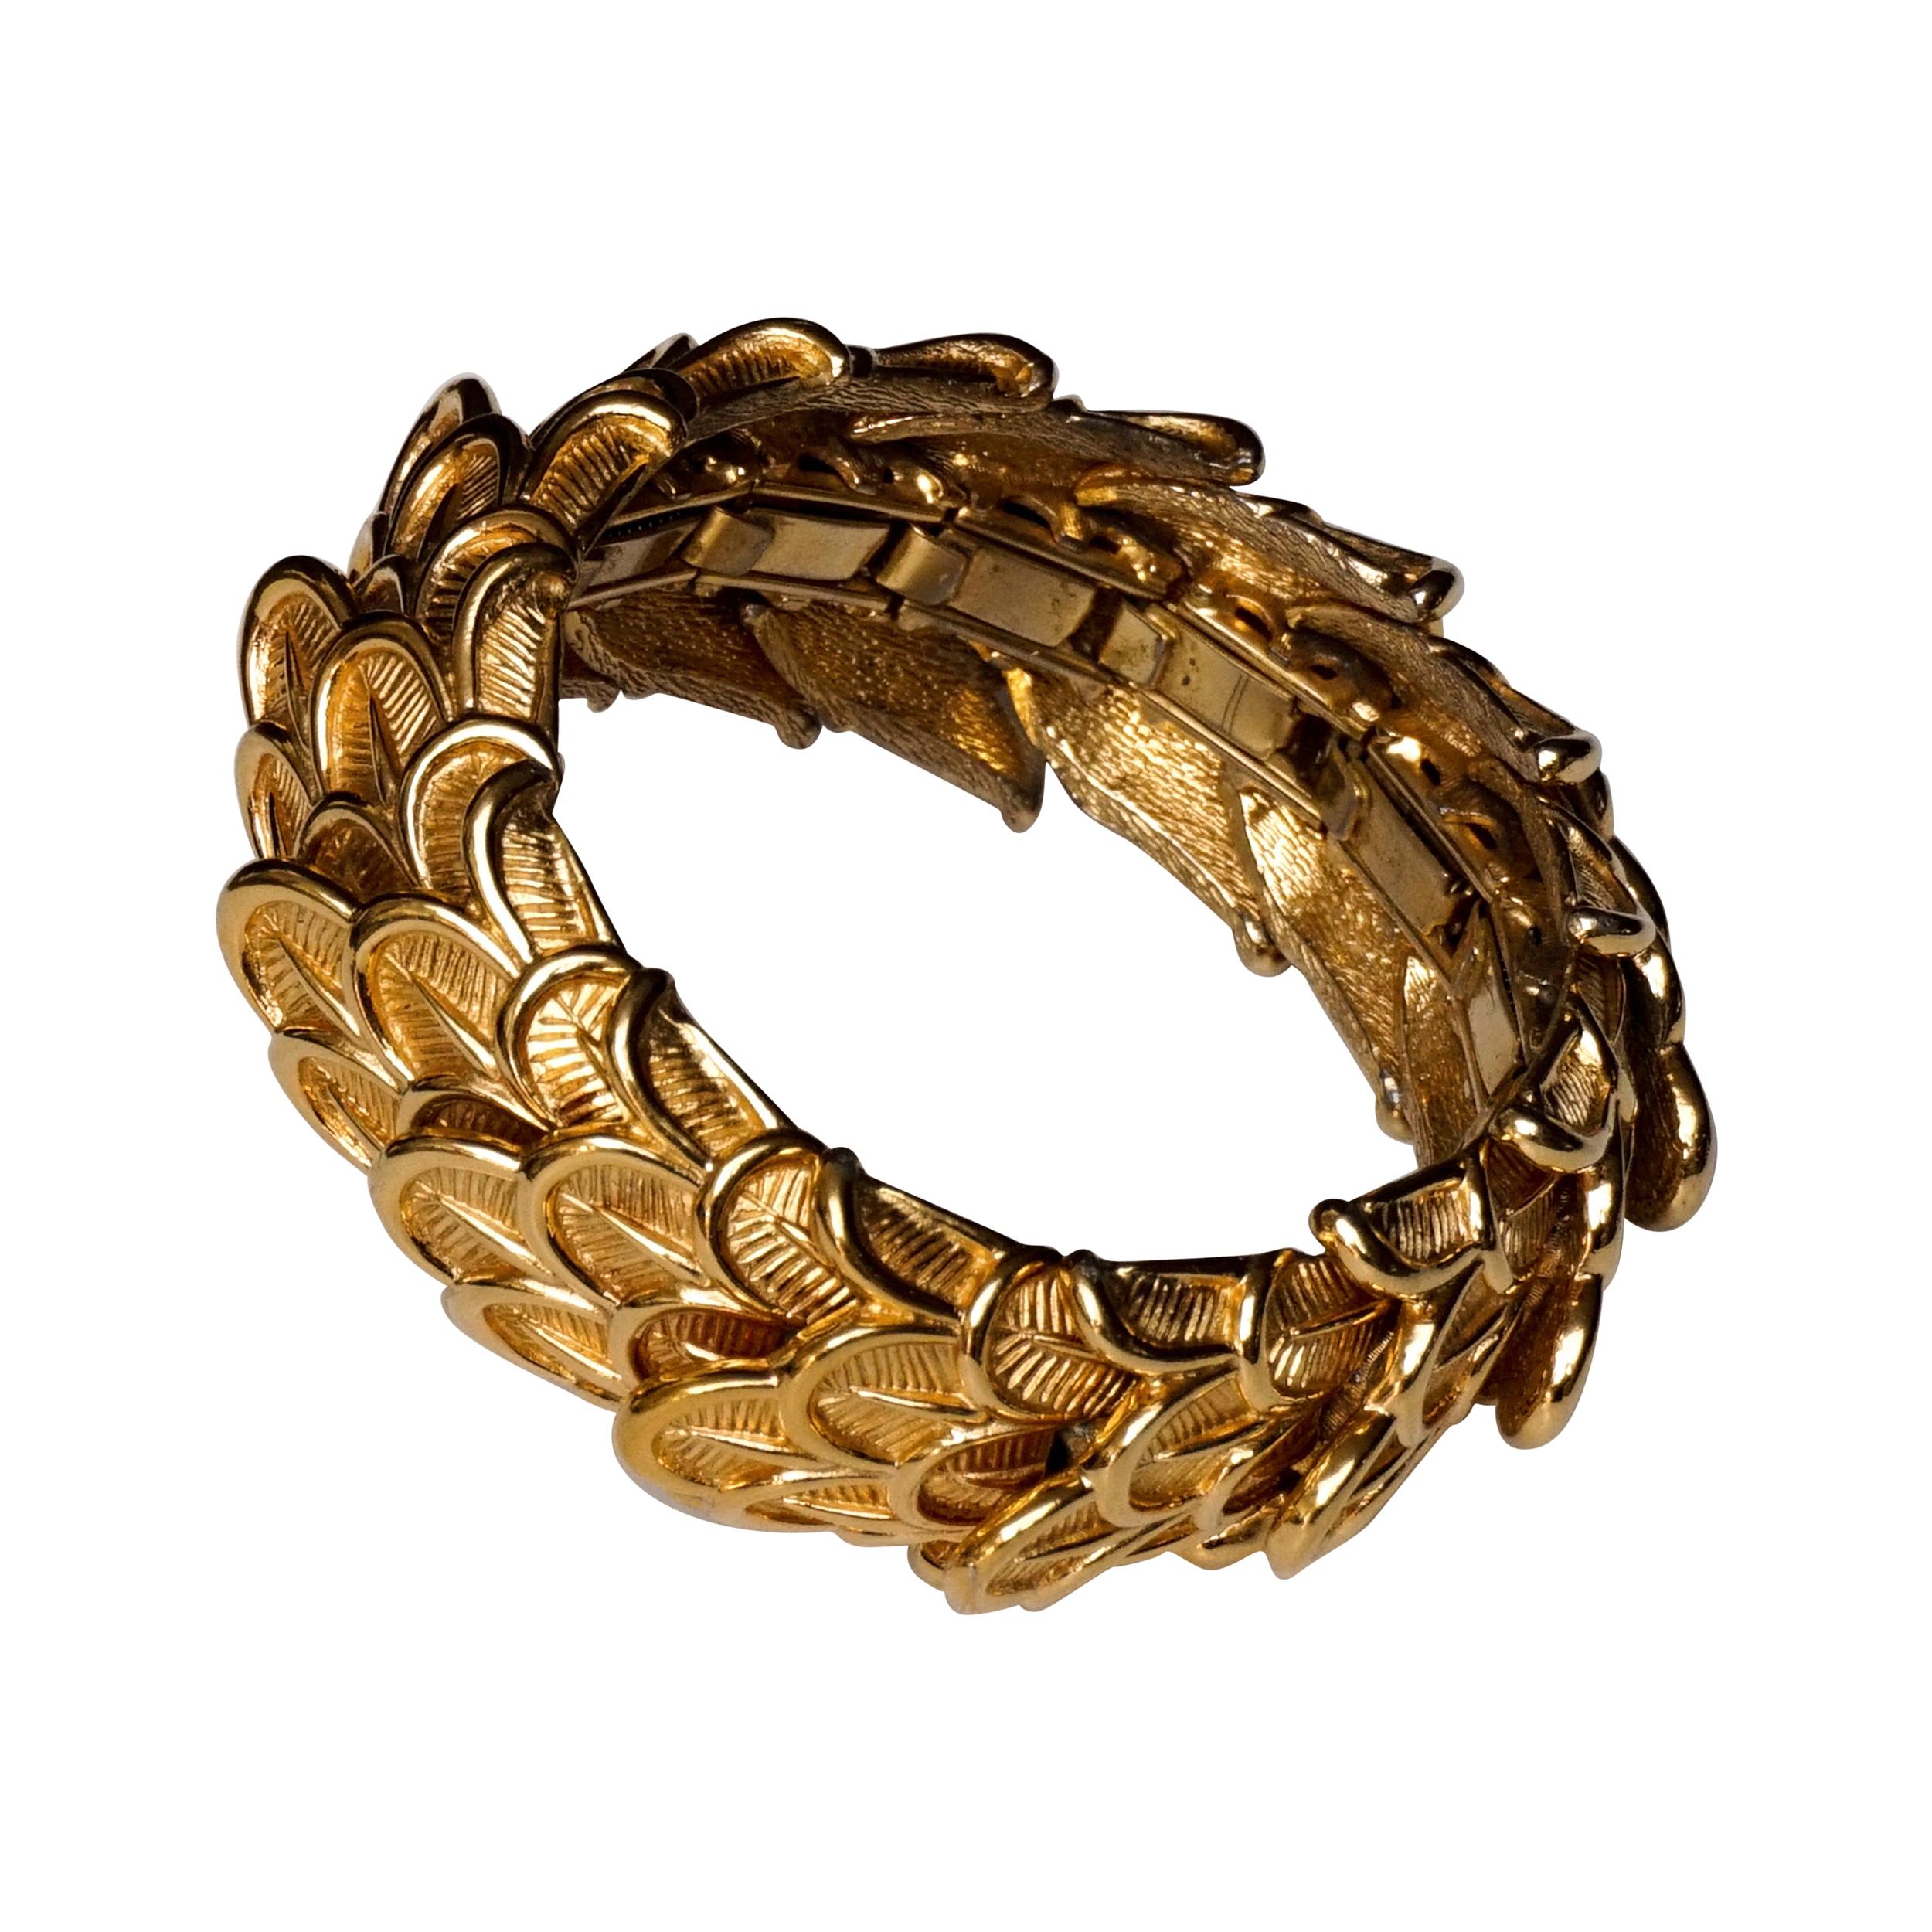 Midcentury 1950s Ny Marcel Boucher Gold Plated Peacock Feather Stretch Bracelet